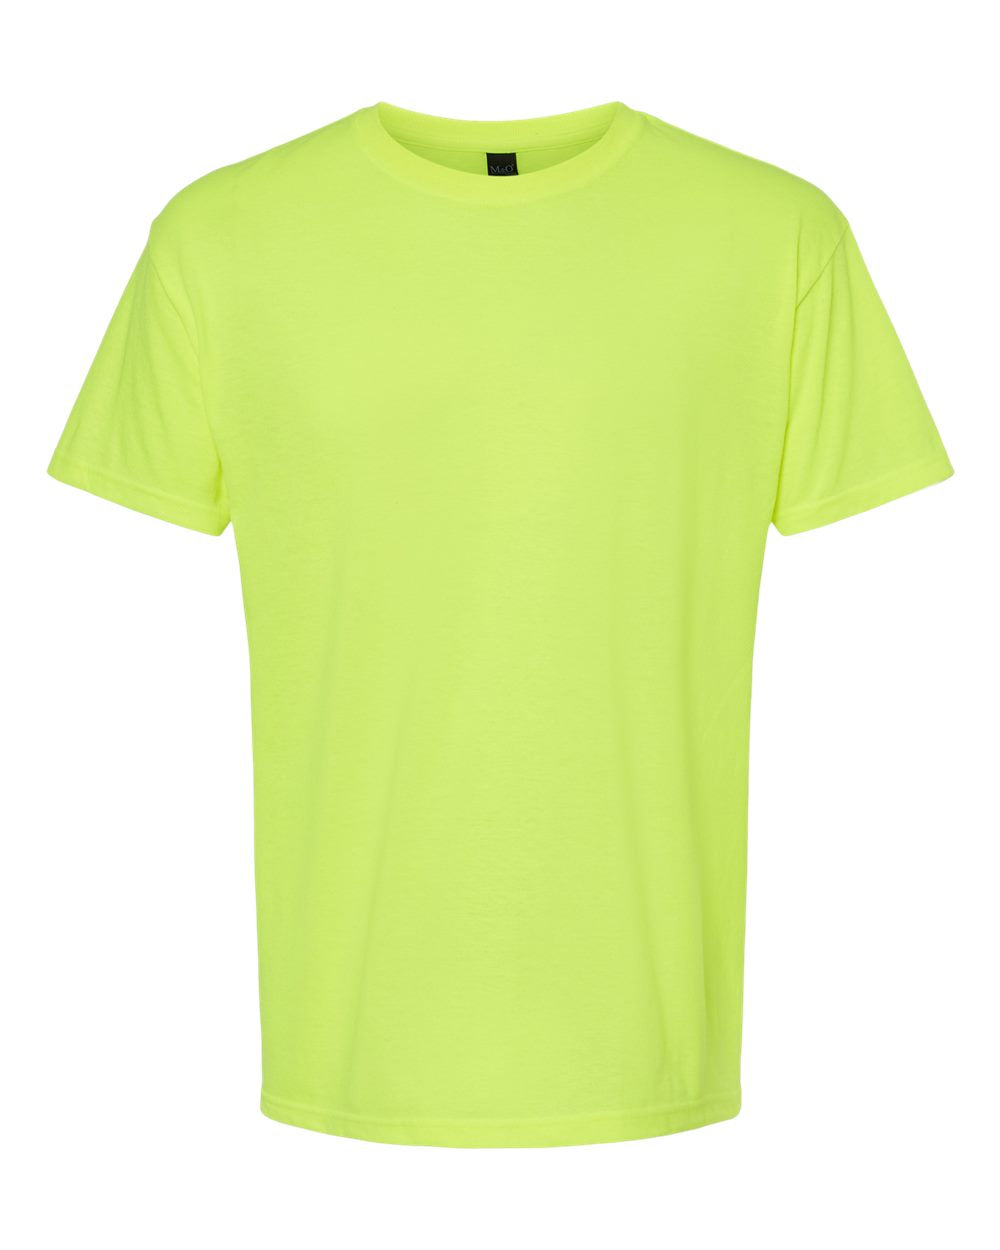 Pretreated M&O 4800 Gold Soft Touch T-Shirt